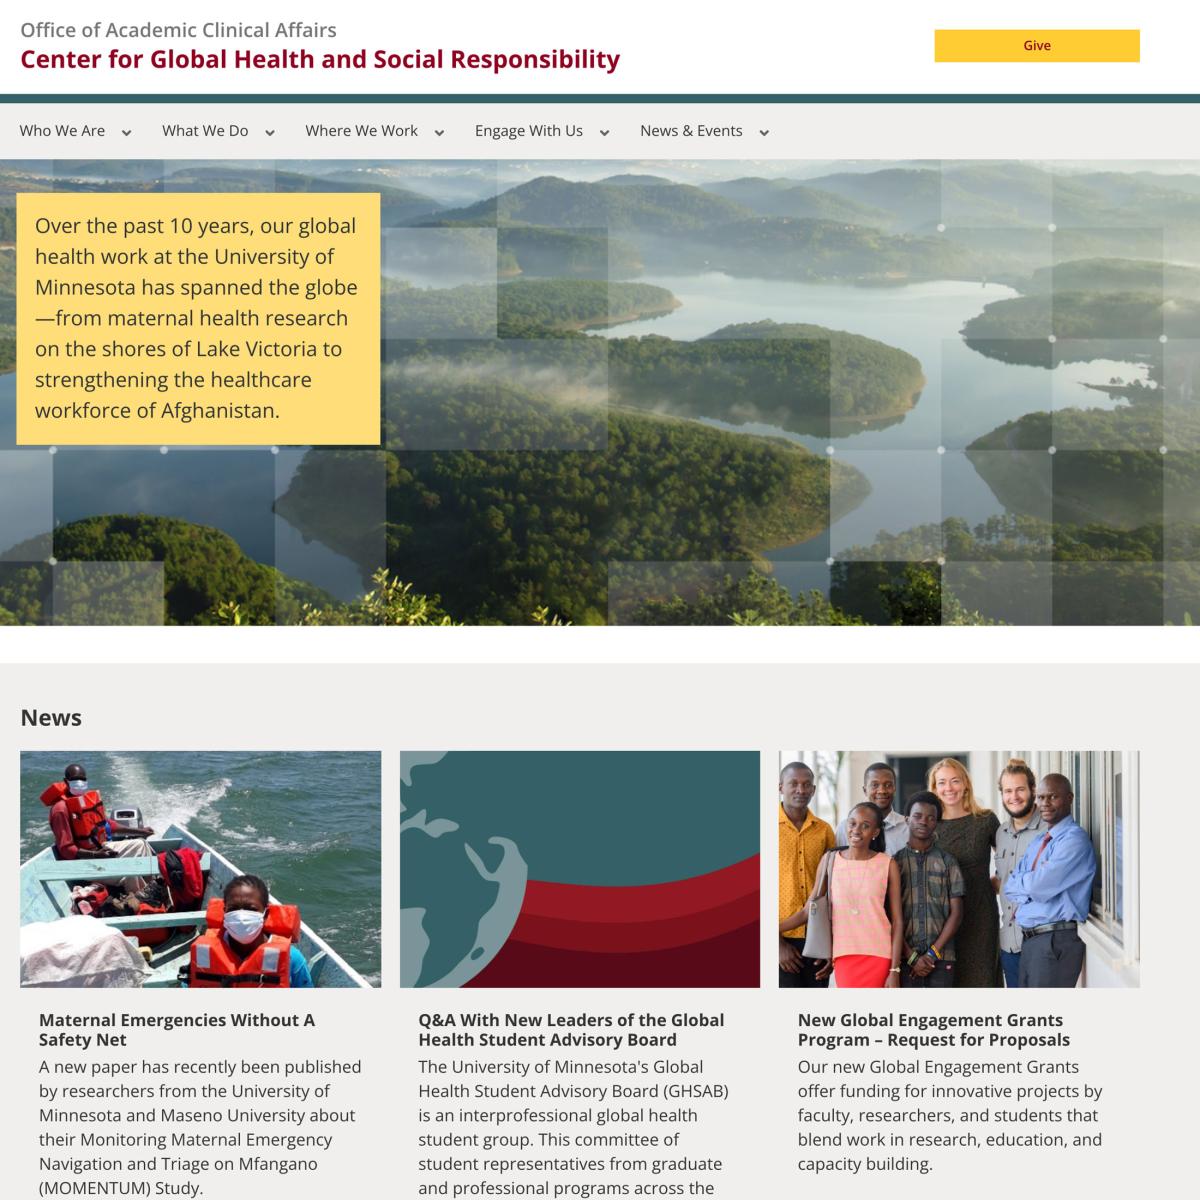 Center for Global Health homepage